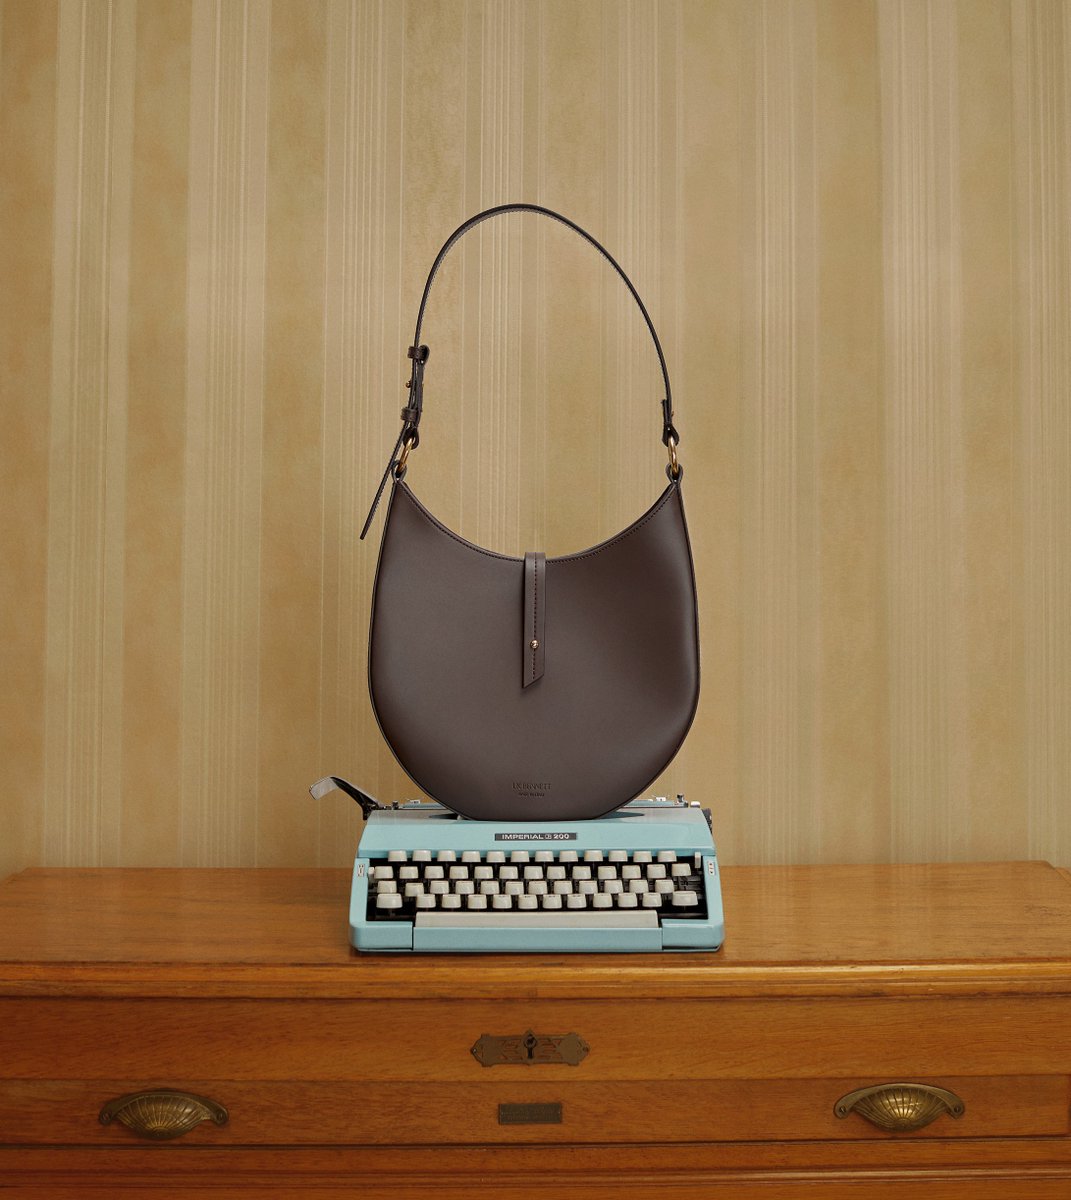 Sleek, chic and tapping into the trend for Nineties' minimalism, our Barbara hobo bag is crafted in Italy from beautifully-smooth chocolate brown leather. #LKBennett ow.ly/VZv350KPnn9